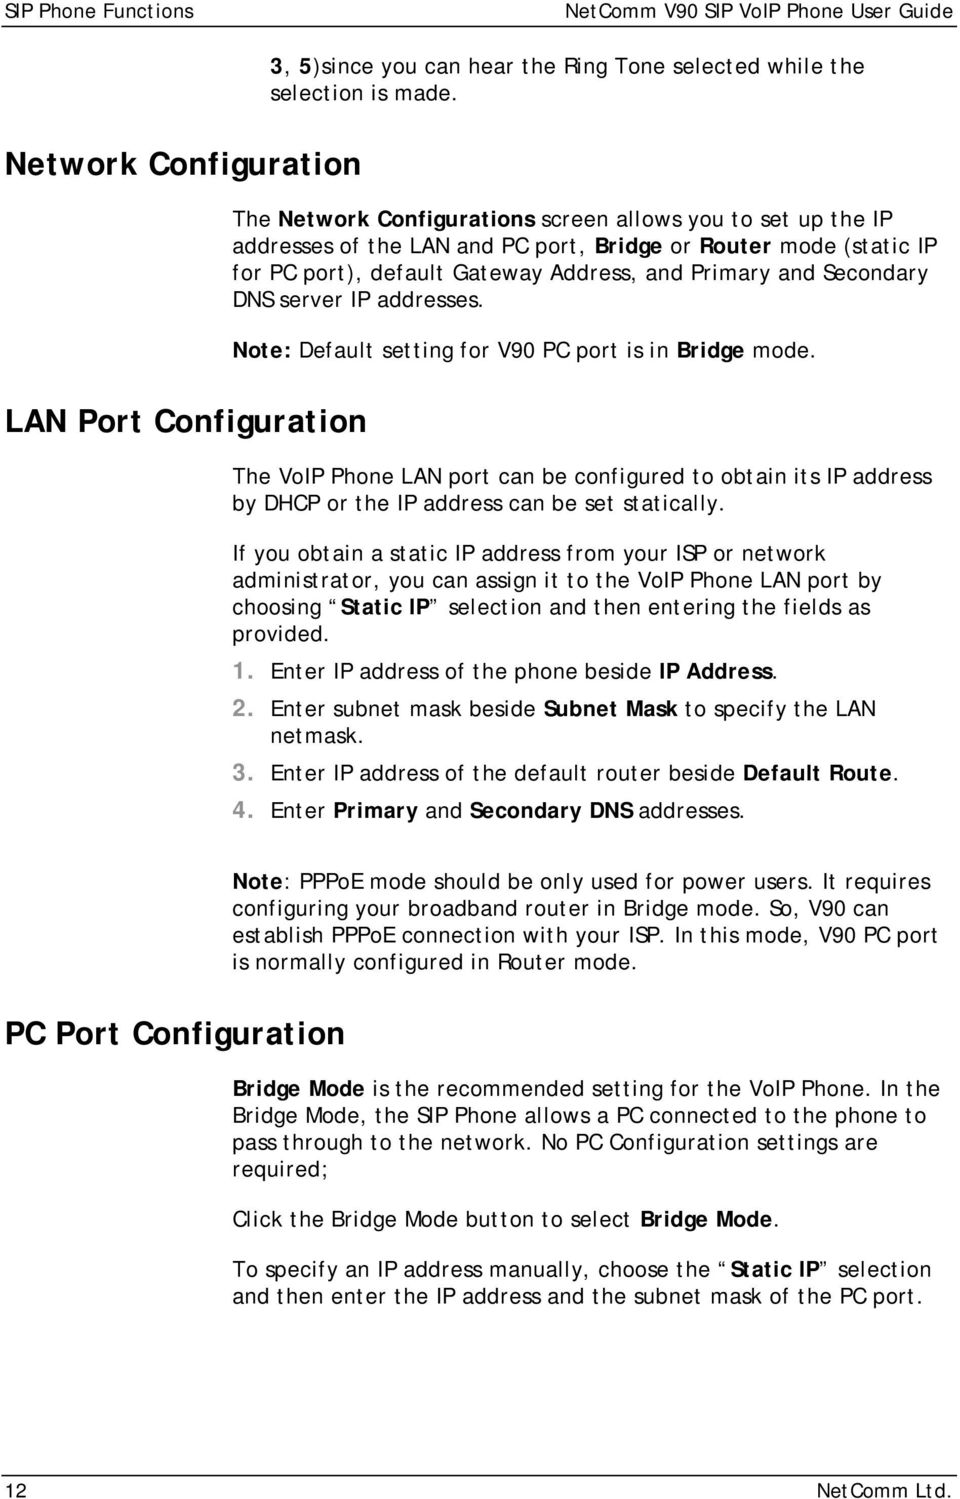 Primary and Secondary DNS server IP addresses. Note: Default setting for V90 PC port is in Bridge mode.